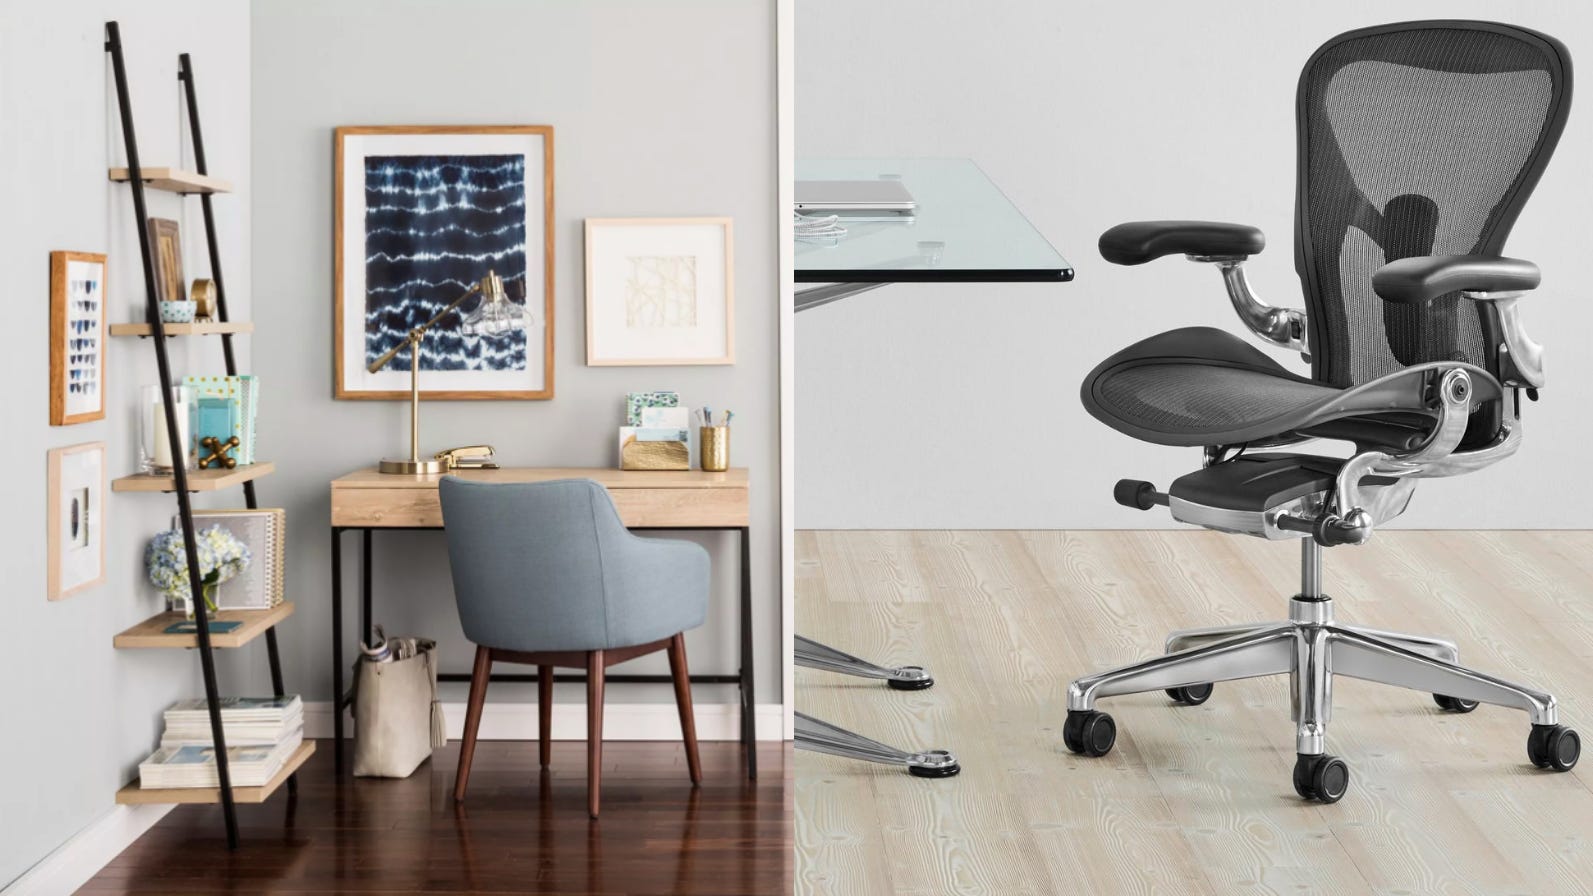 Where to buy desks and desk chairs: Amazon, Home Depot, Target, and more